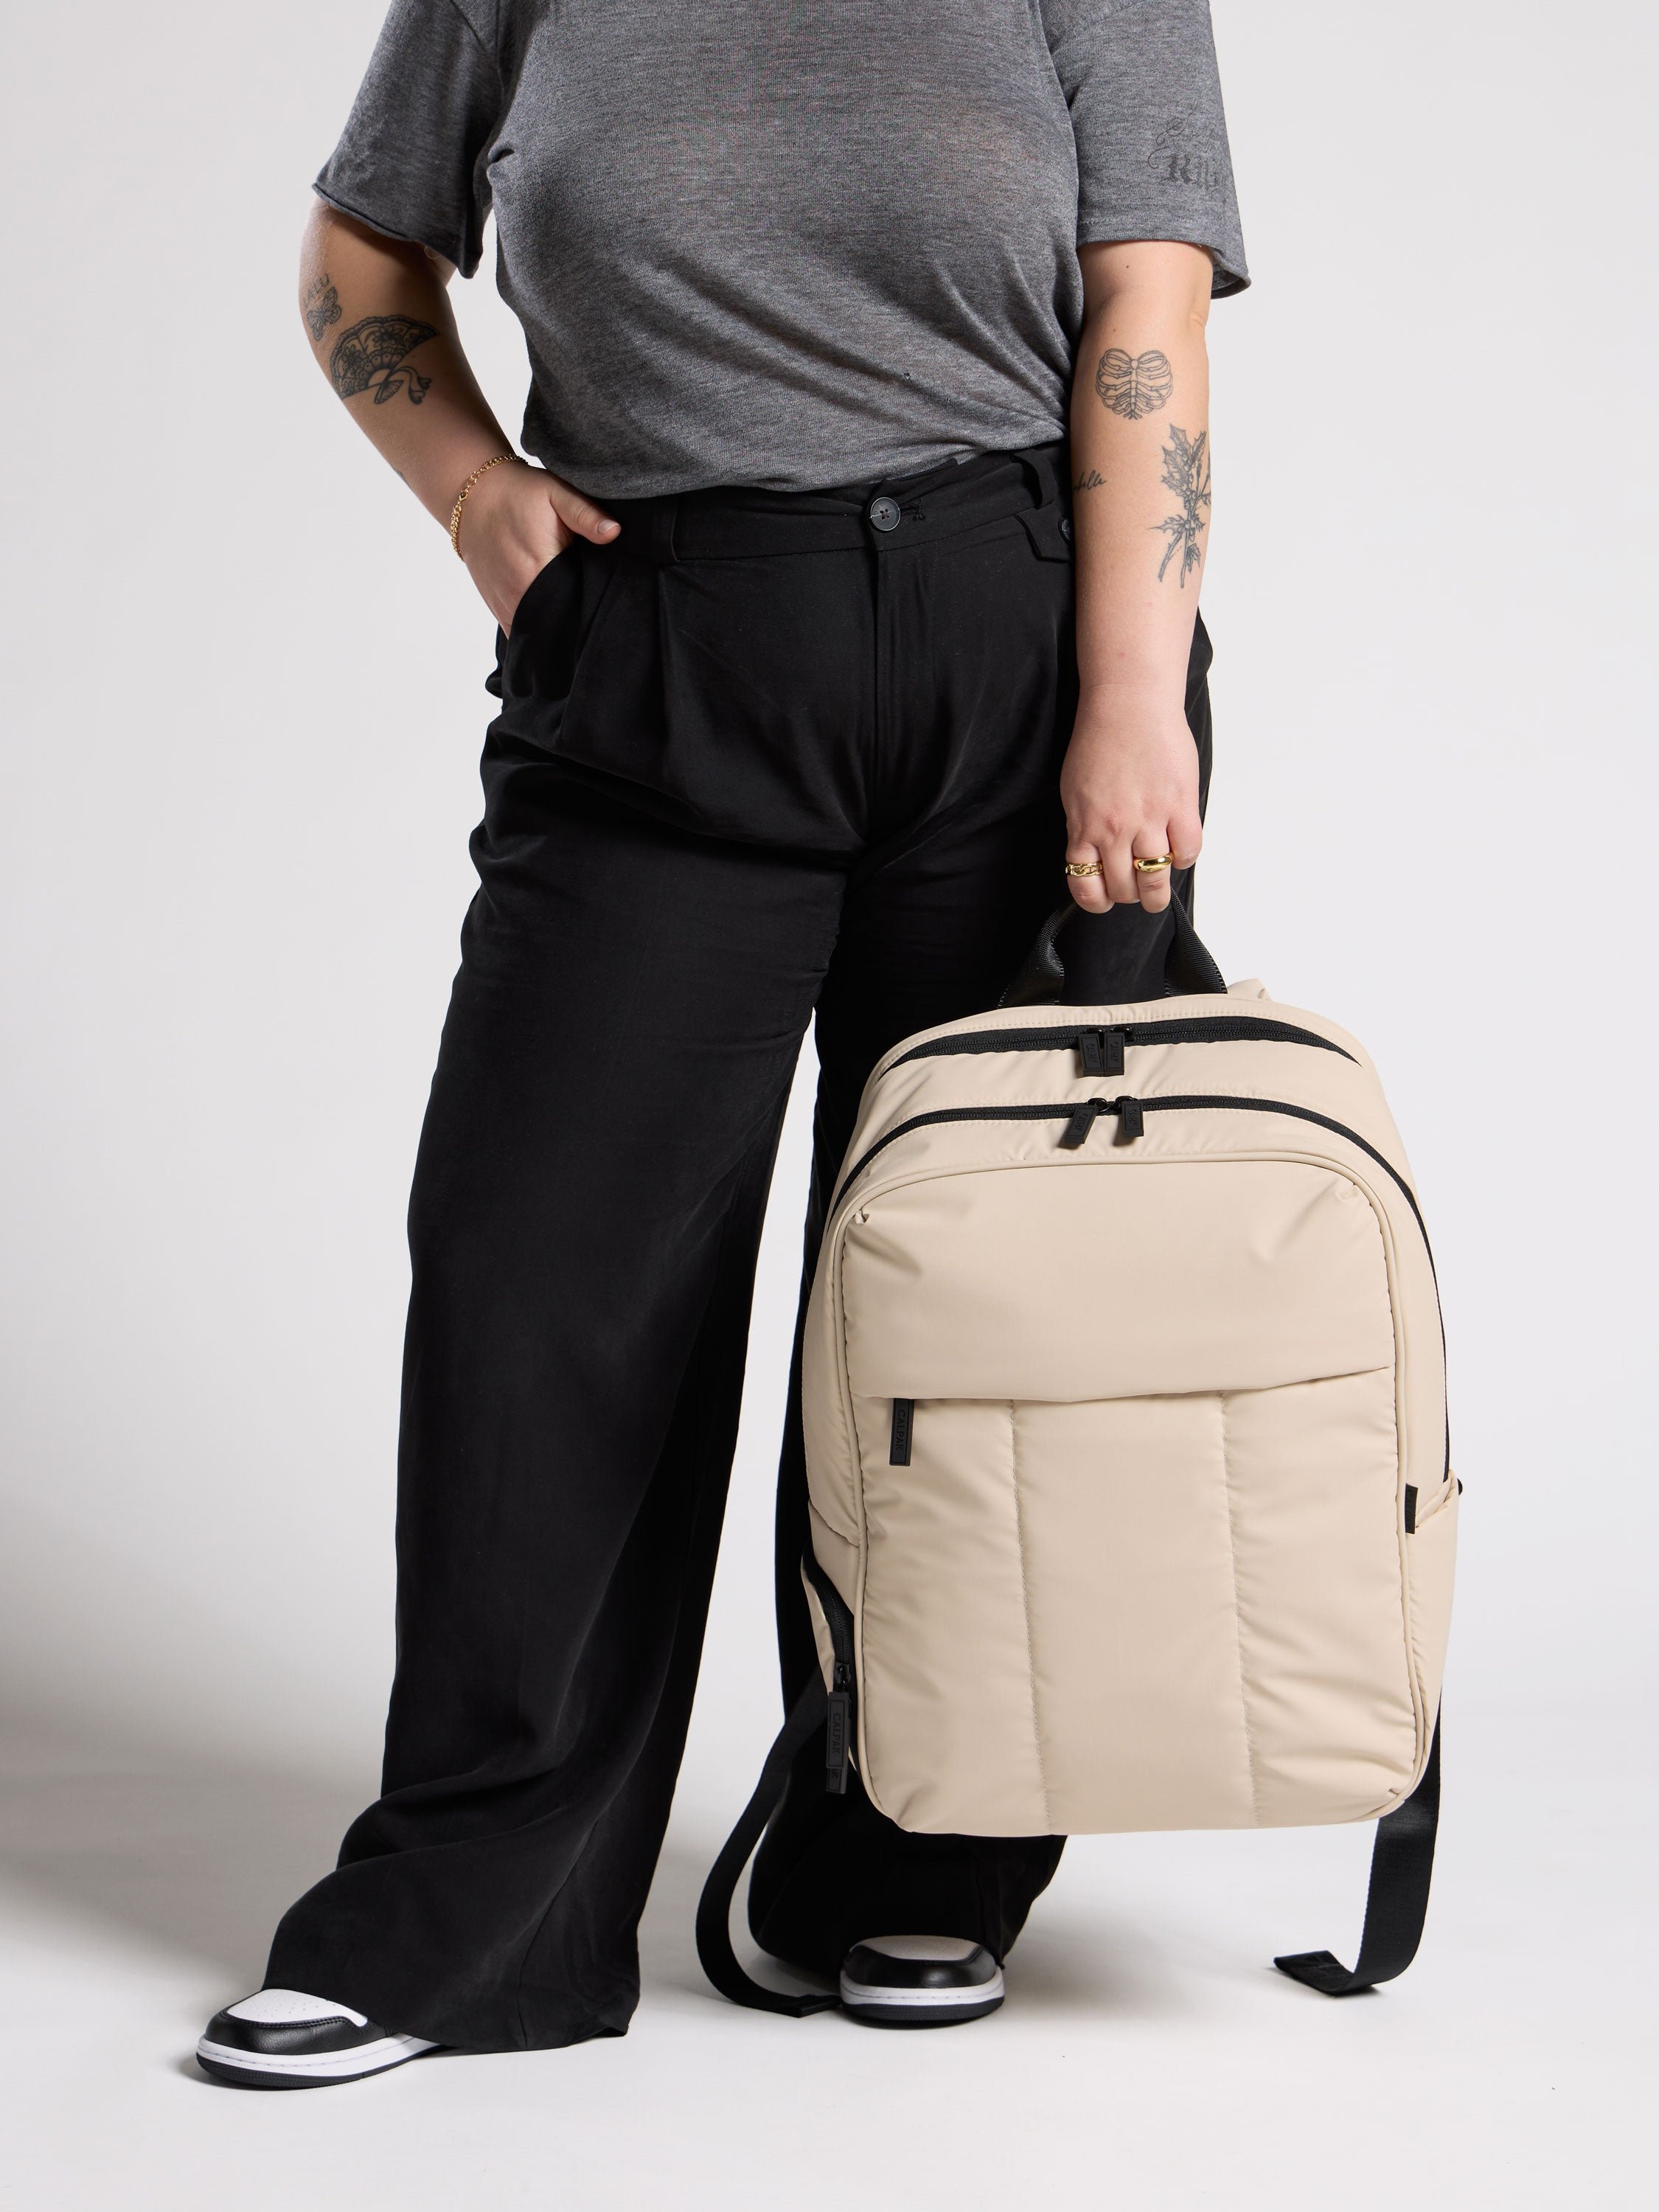 Model holding sofy, puffy CALPAK Luka 17 inch Laptop Backpack in oatmeal with water resistant exterior